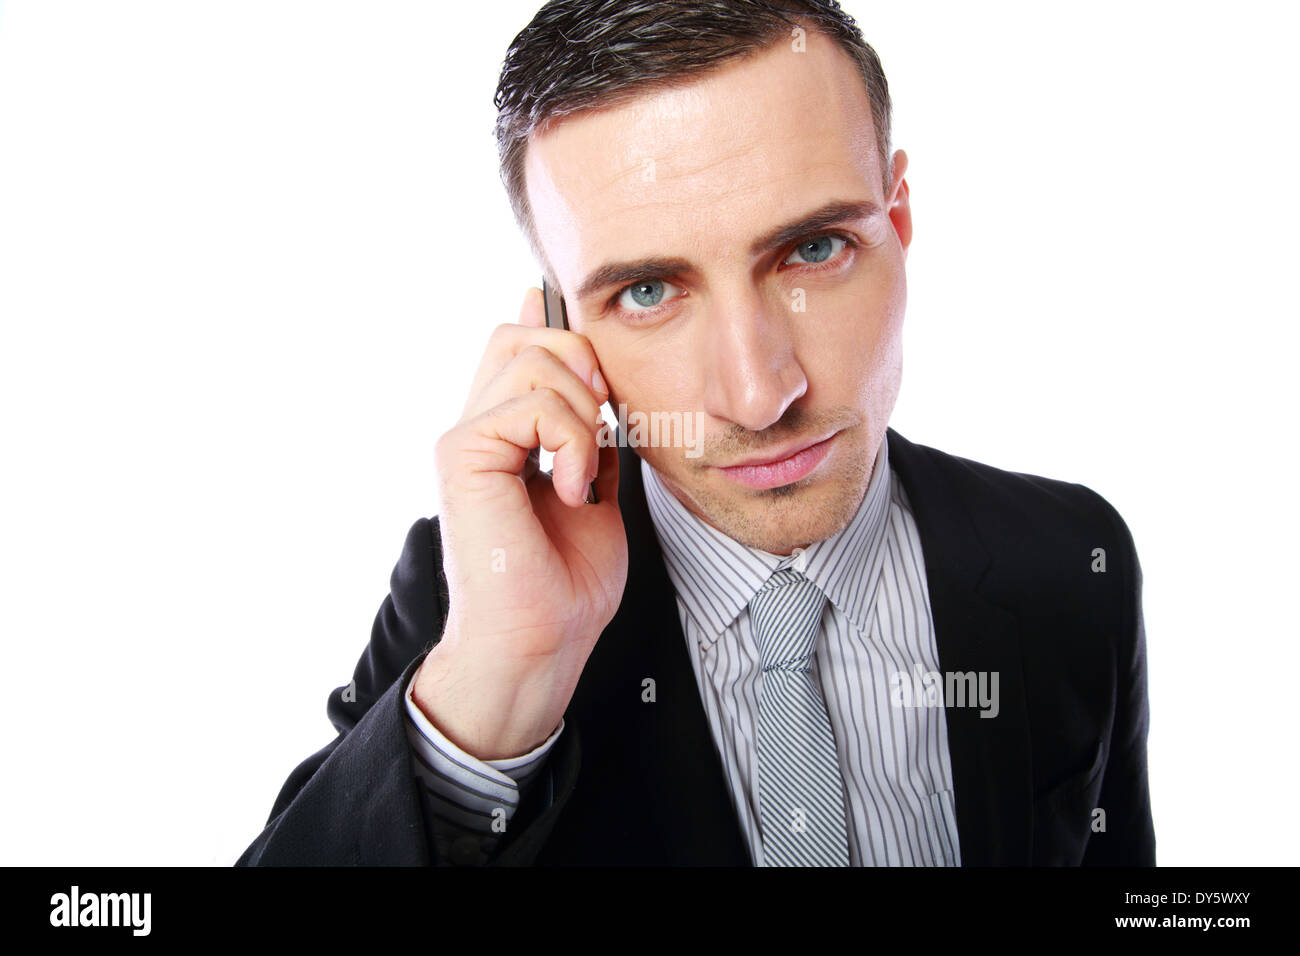 Business man talking on his mobile phone over white background Stock Photo